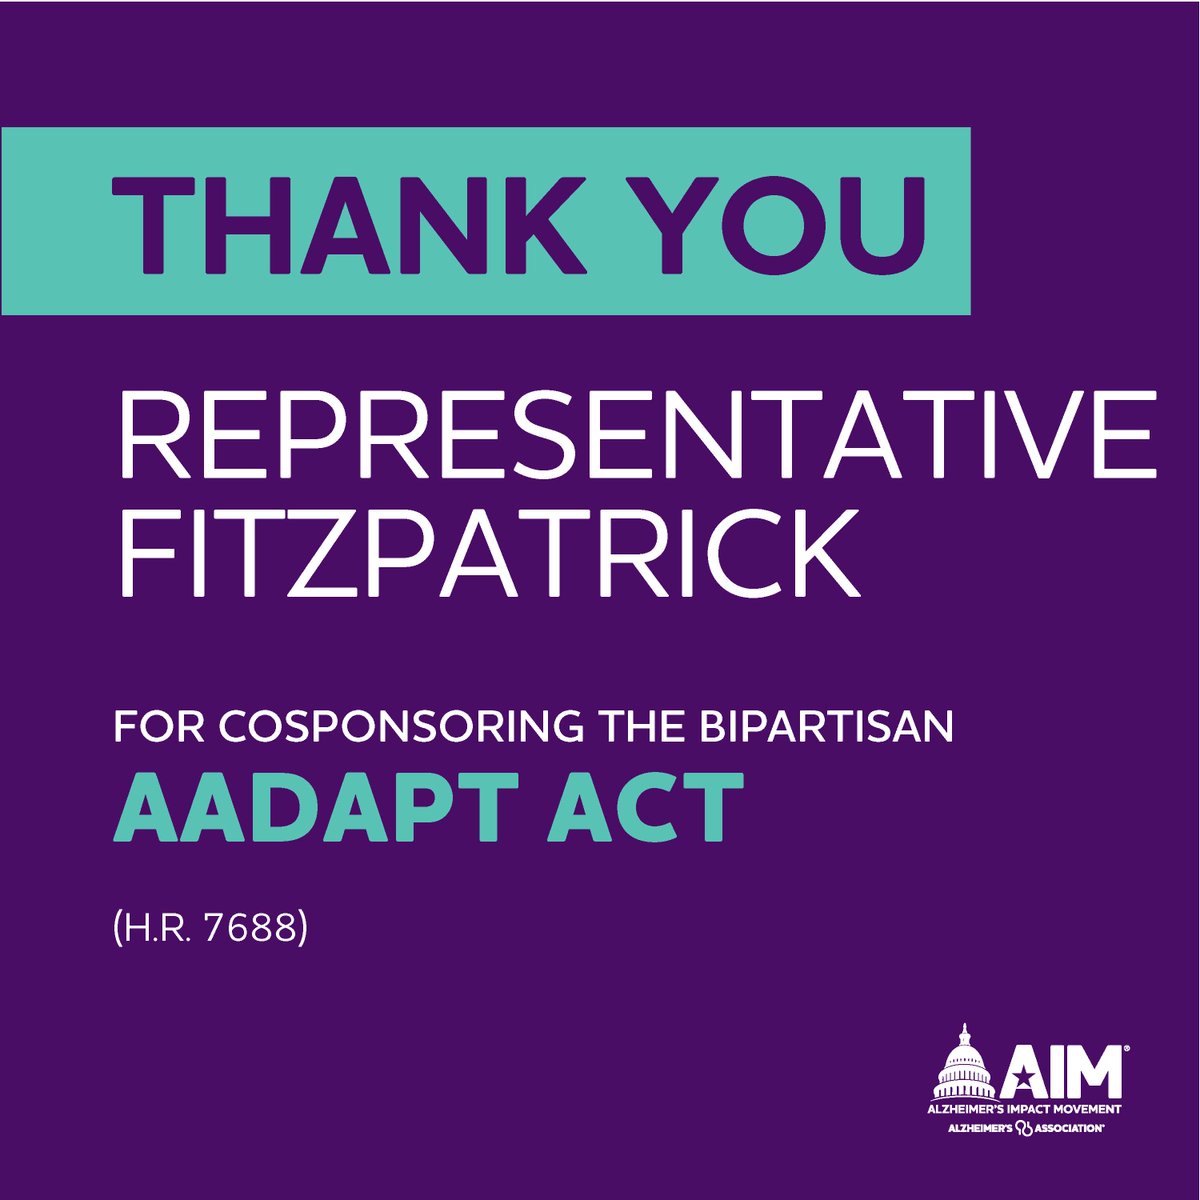 Thank you, @RepBrianFitz, for supporting the Alzheimer’s and dementia community by cosponsoring the #AADAPTAct, which will improve dementia training and education for primary care providers.